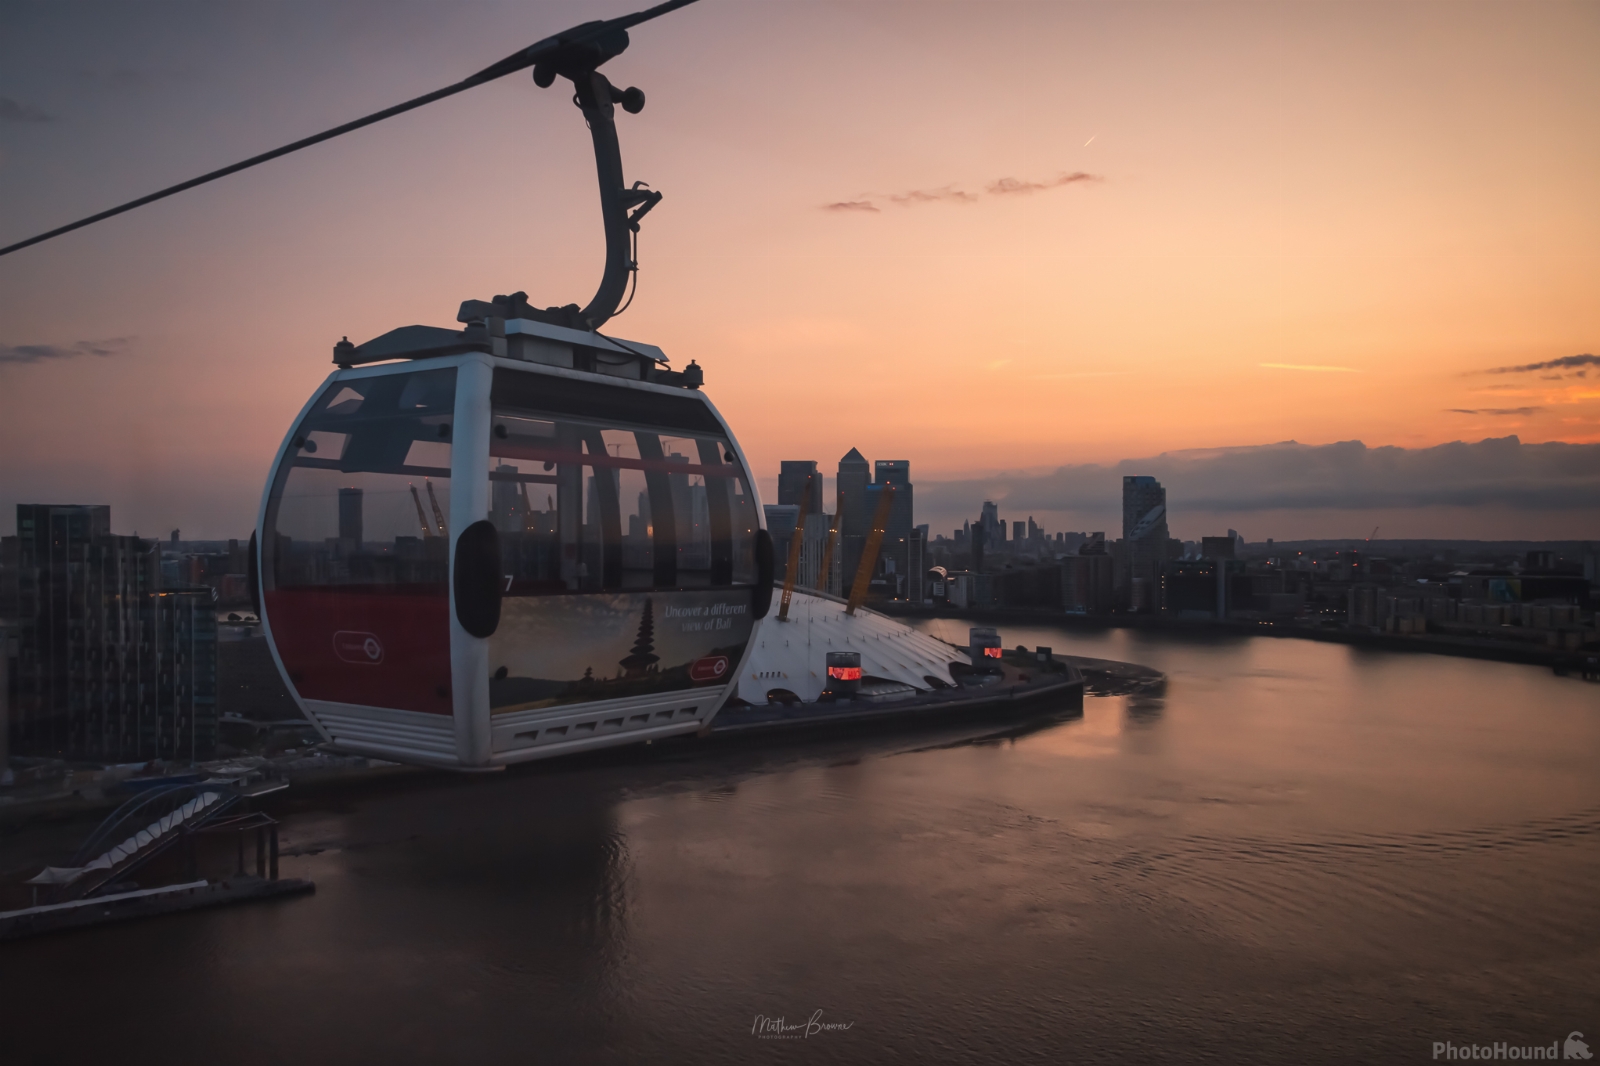 Image of Emirates Cable Car by Mathew Browne